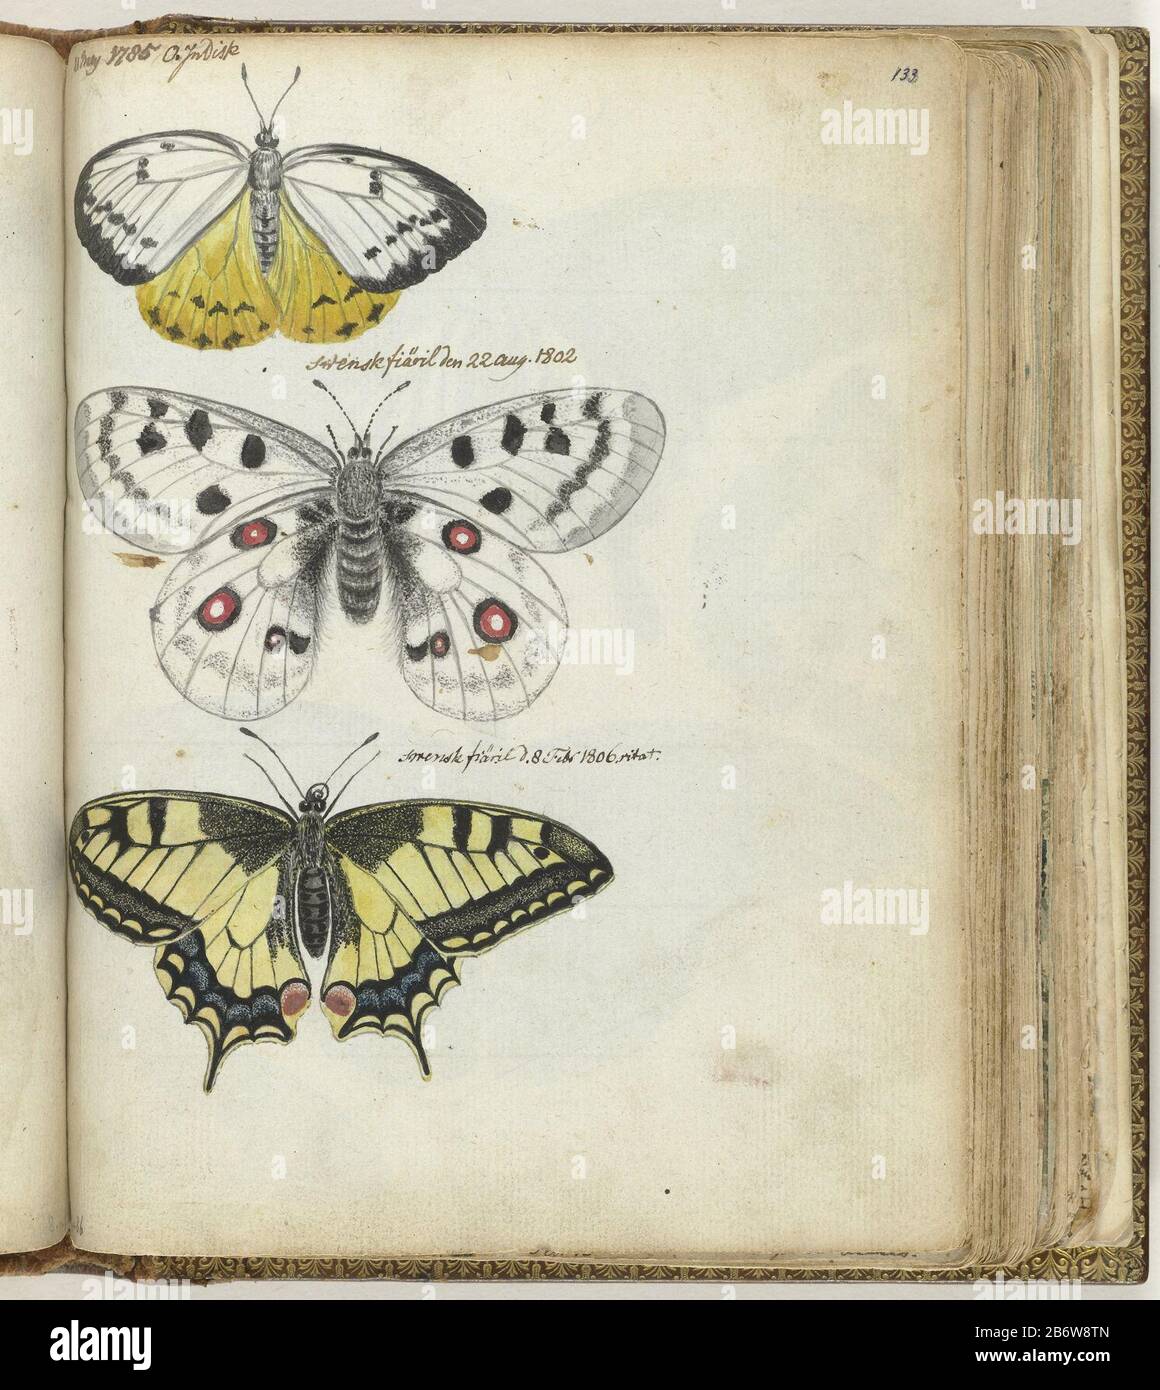 https://c8.alamy.com/comp/2B6W8TN/indische-vlinder-en-zweedse-vlinders-color-drawing-of-a-butterfly-java-and-two-swedish-butterflies-with-inscription-and-dating-and-may-21-1785-august-22-1802-and-february-8-1806-part-of-the-sketchbook-of-jan-brandes-vol-1-1808-p-132-manufacturer-artist-jan-brandesplaats-manufacture-artist-jakartasklsebo-dating21-may-1785-8-feb-1806-physical-features-watercolor-on-sketch-in-pencil-paintbrush-color-material-paper-pencil-technique-brush-dimensions-h-195-mm-w-155-mm-date-1785-1806wie-jan-brandes-2B6W8TN.jpg